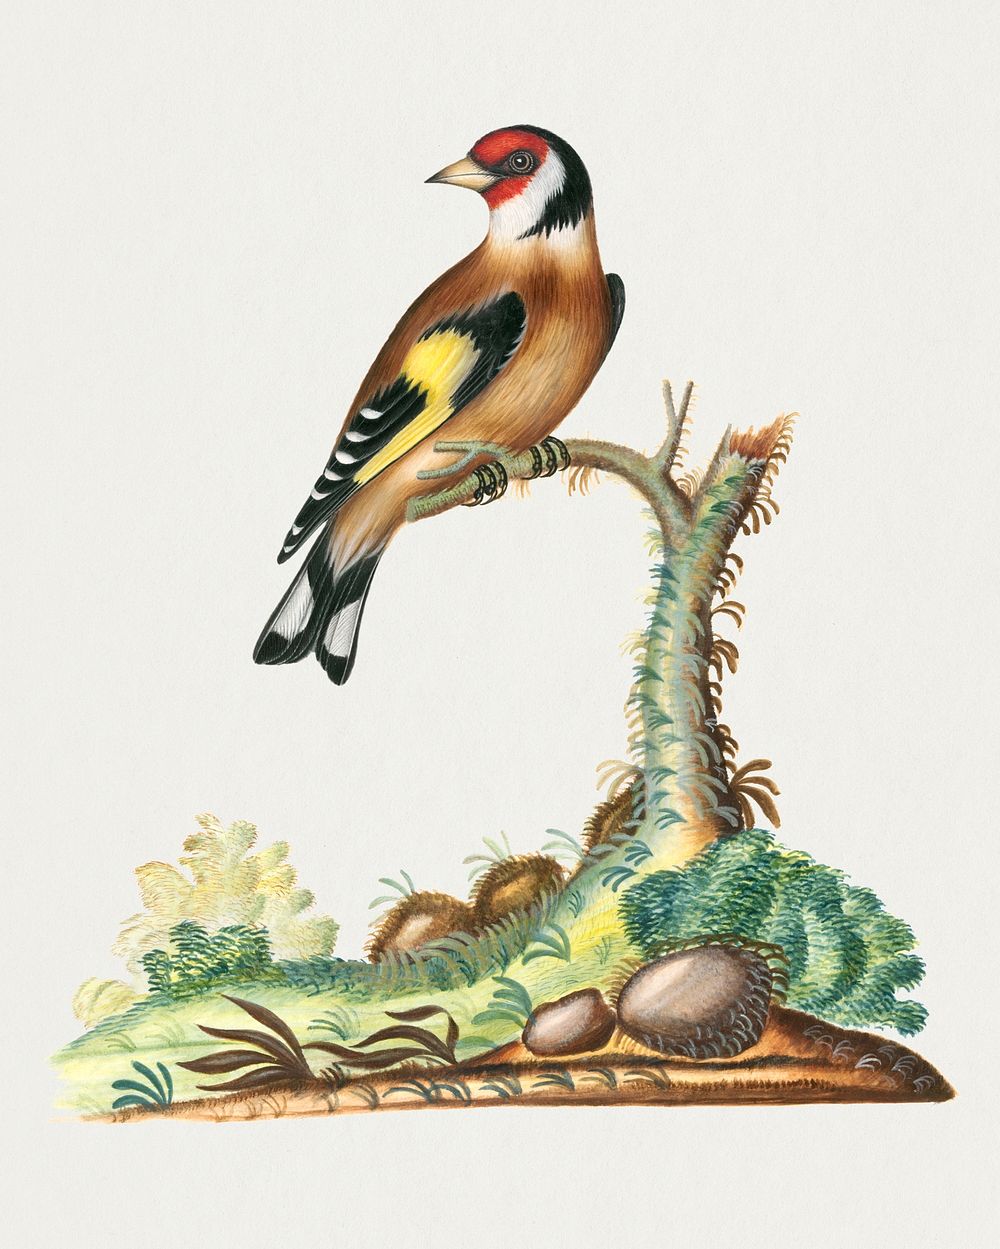 Vintage goldfinch sticker, bird watercolor painting psd, remixed from artworks by James Bolton